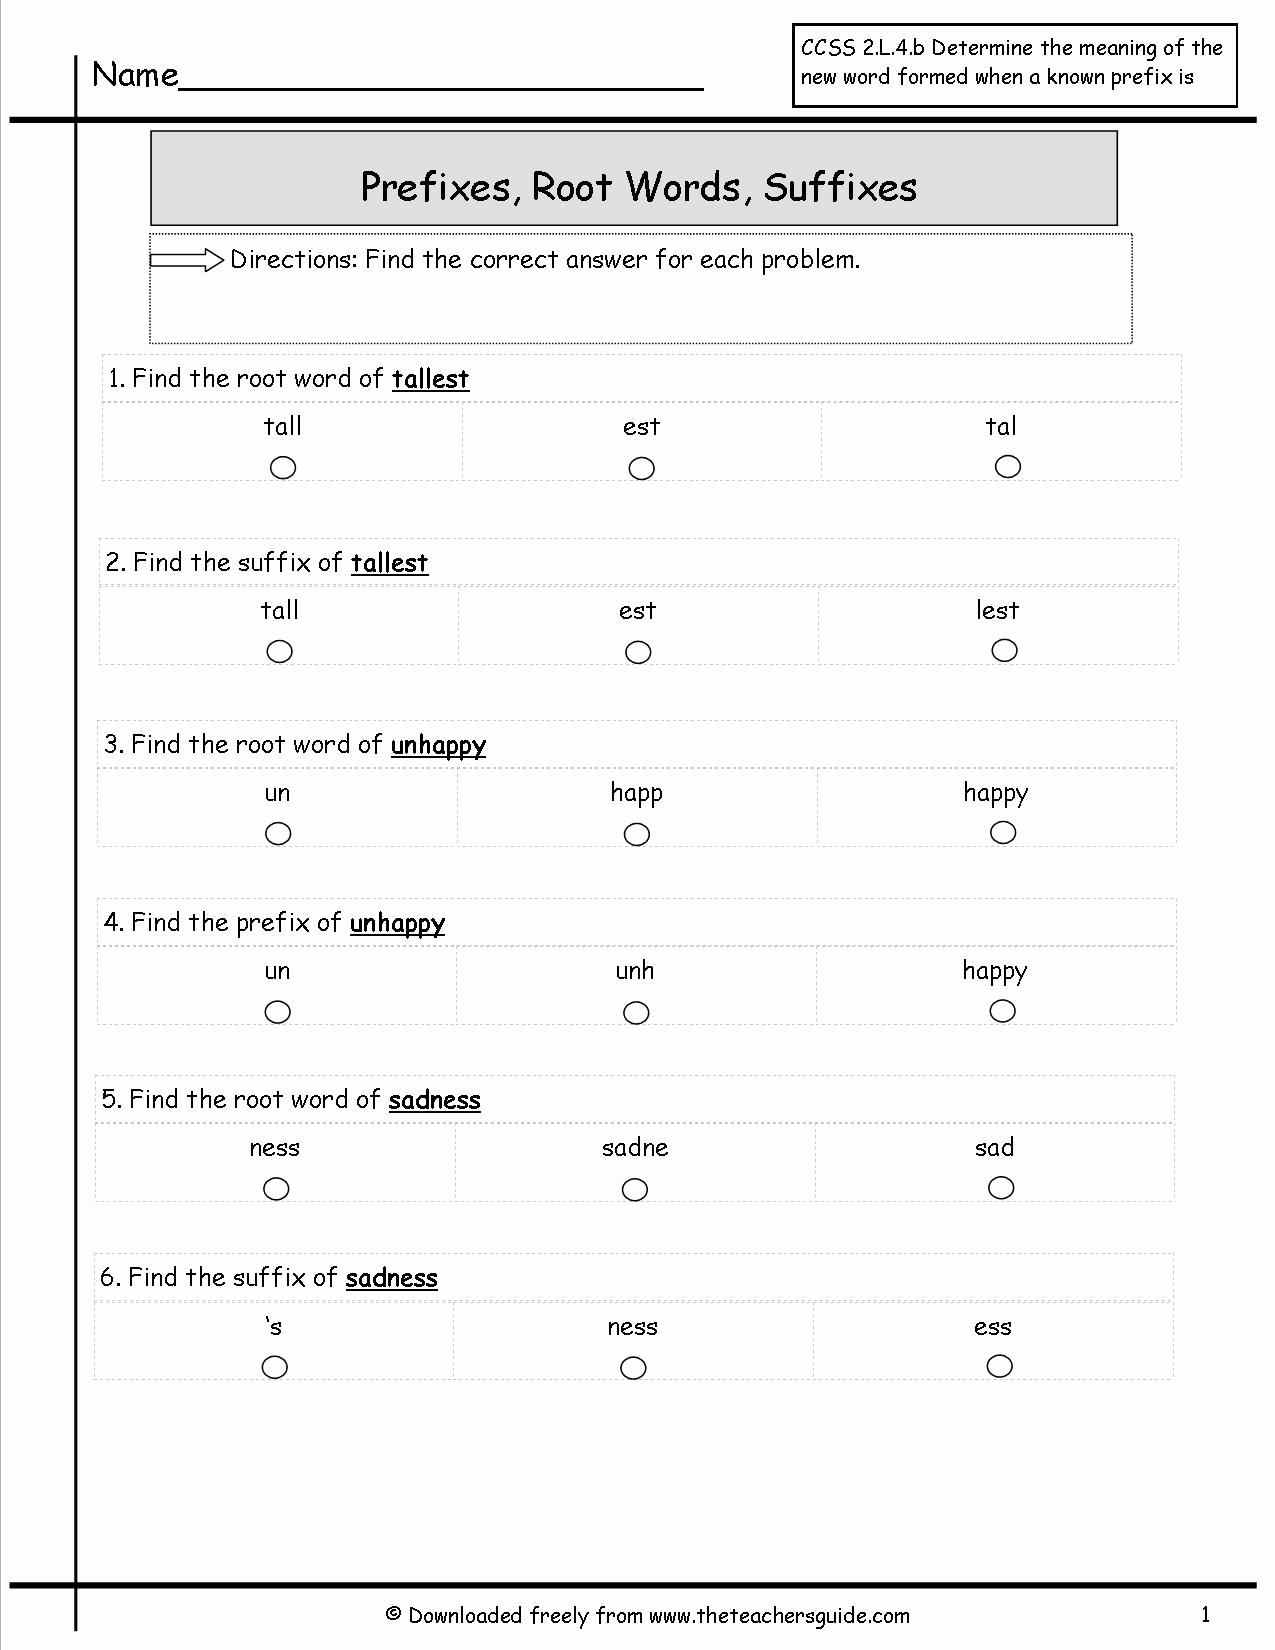 Free Suffix Worksheet New Teach Child How to Read Printable Prefix and Suffix